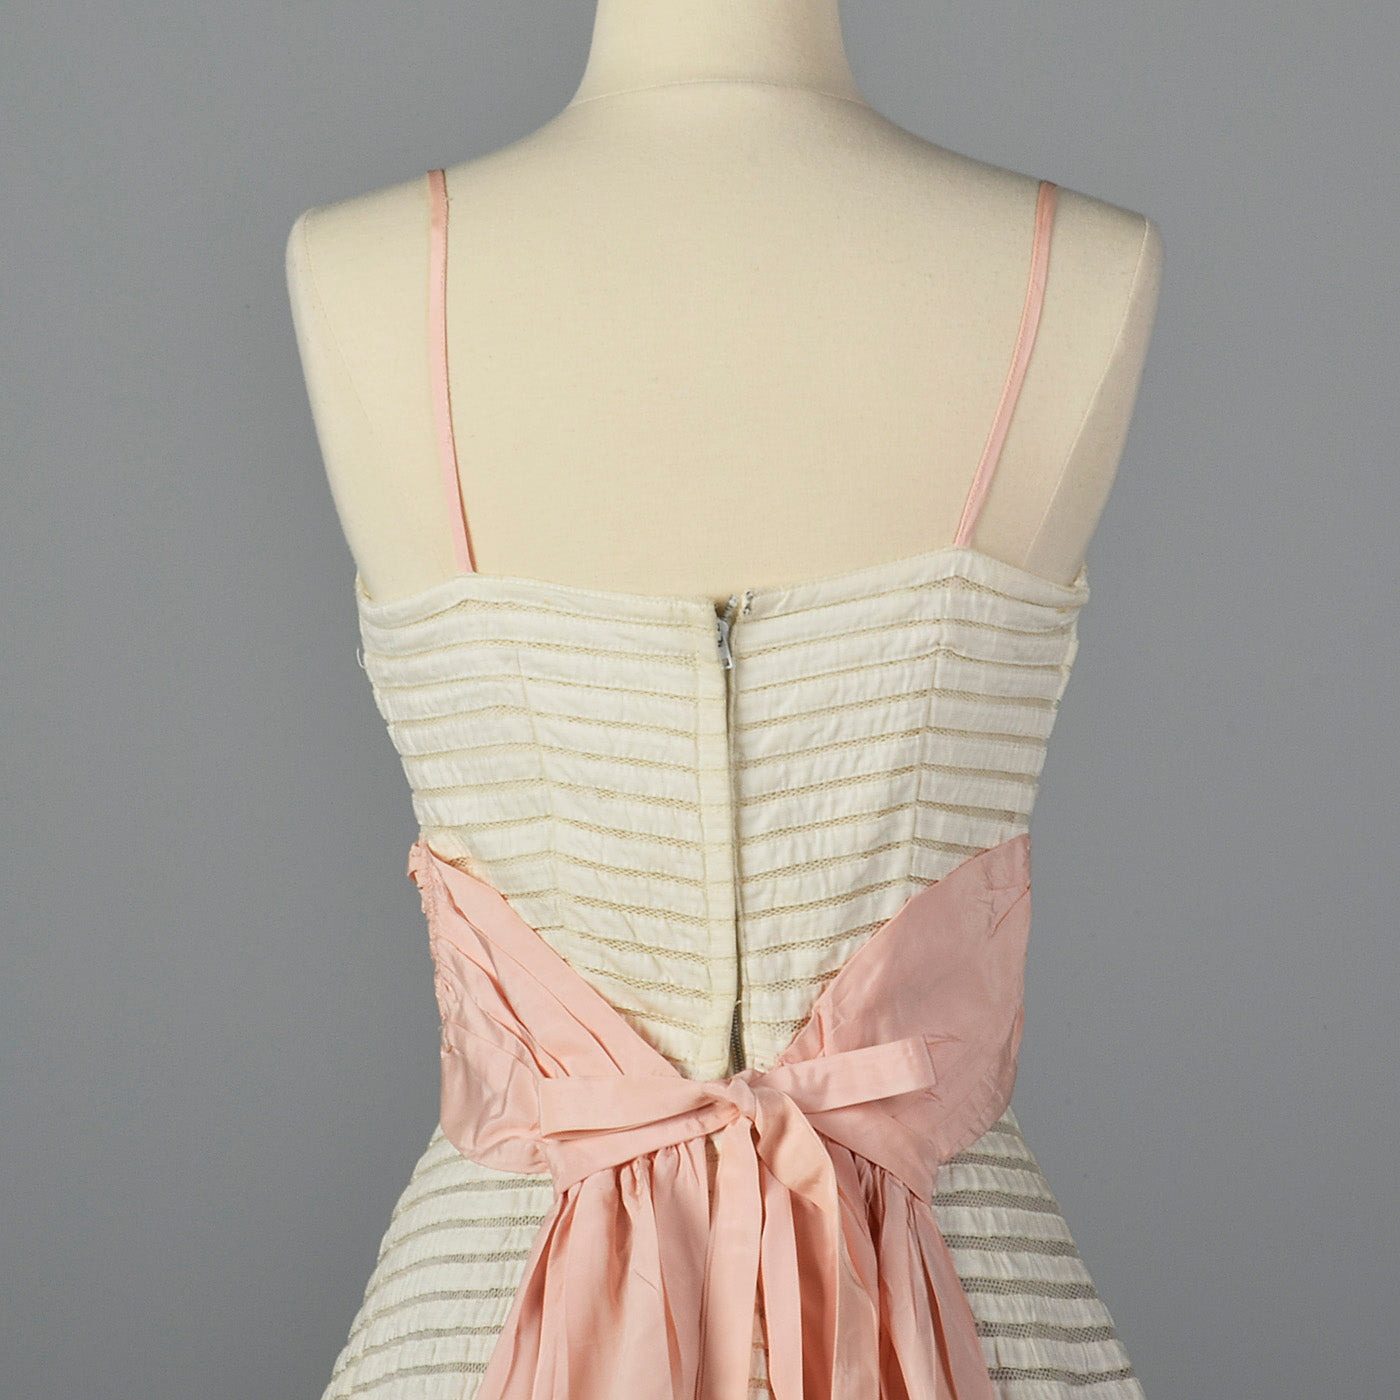 1950s White Party Dress with Sheer Mesh Stripes